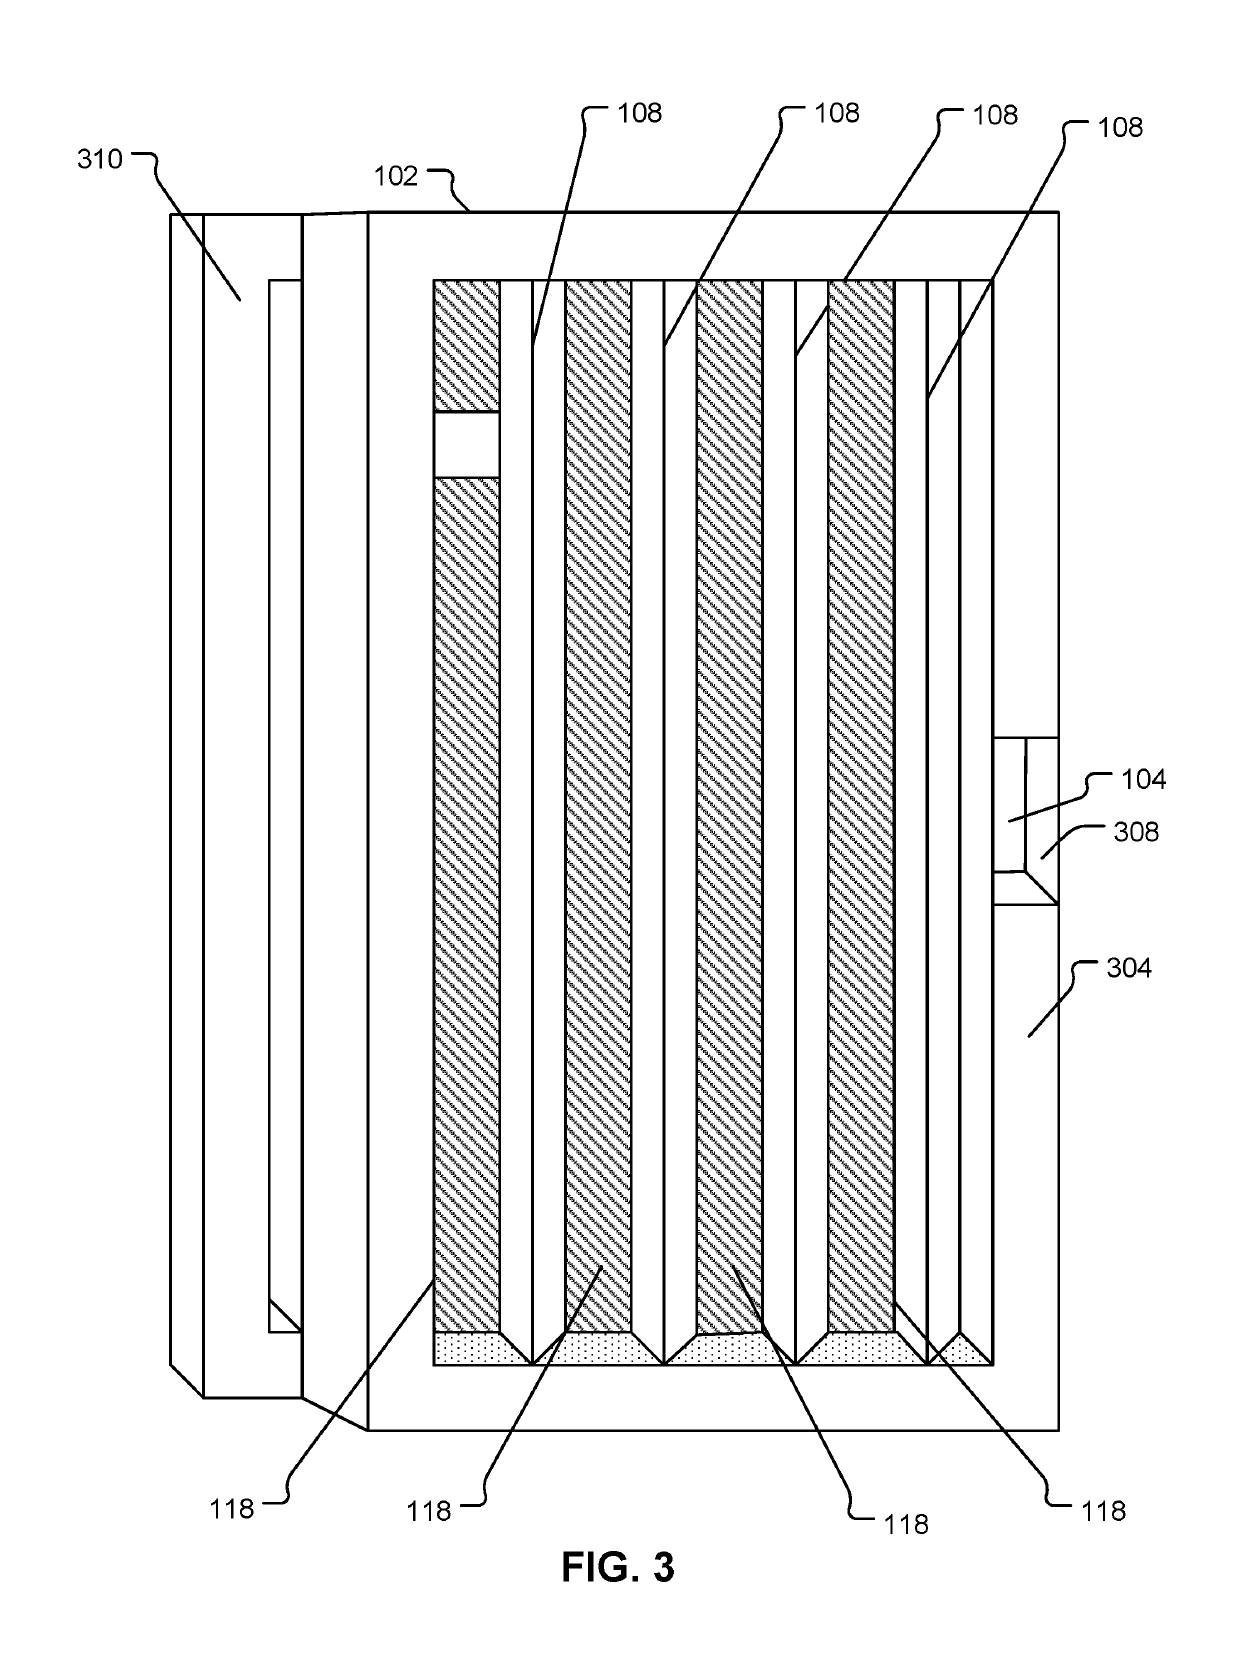 Method and apparatus for acoustical noise reduction and distributed airflow